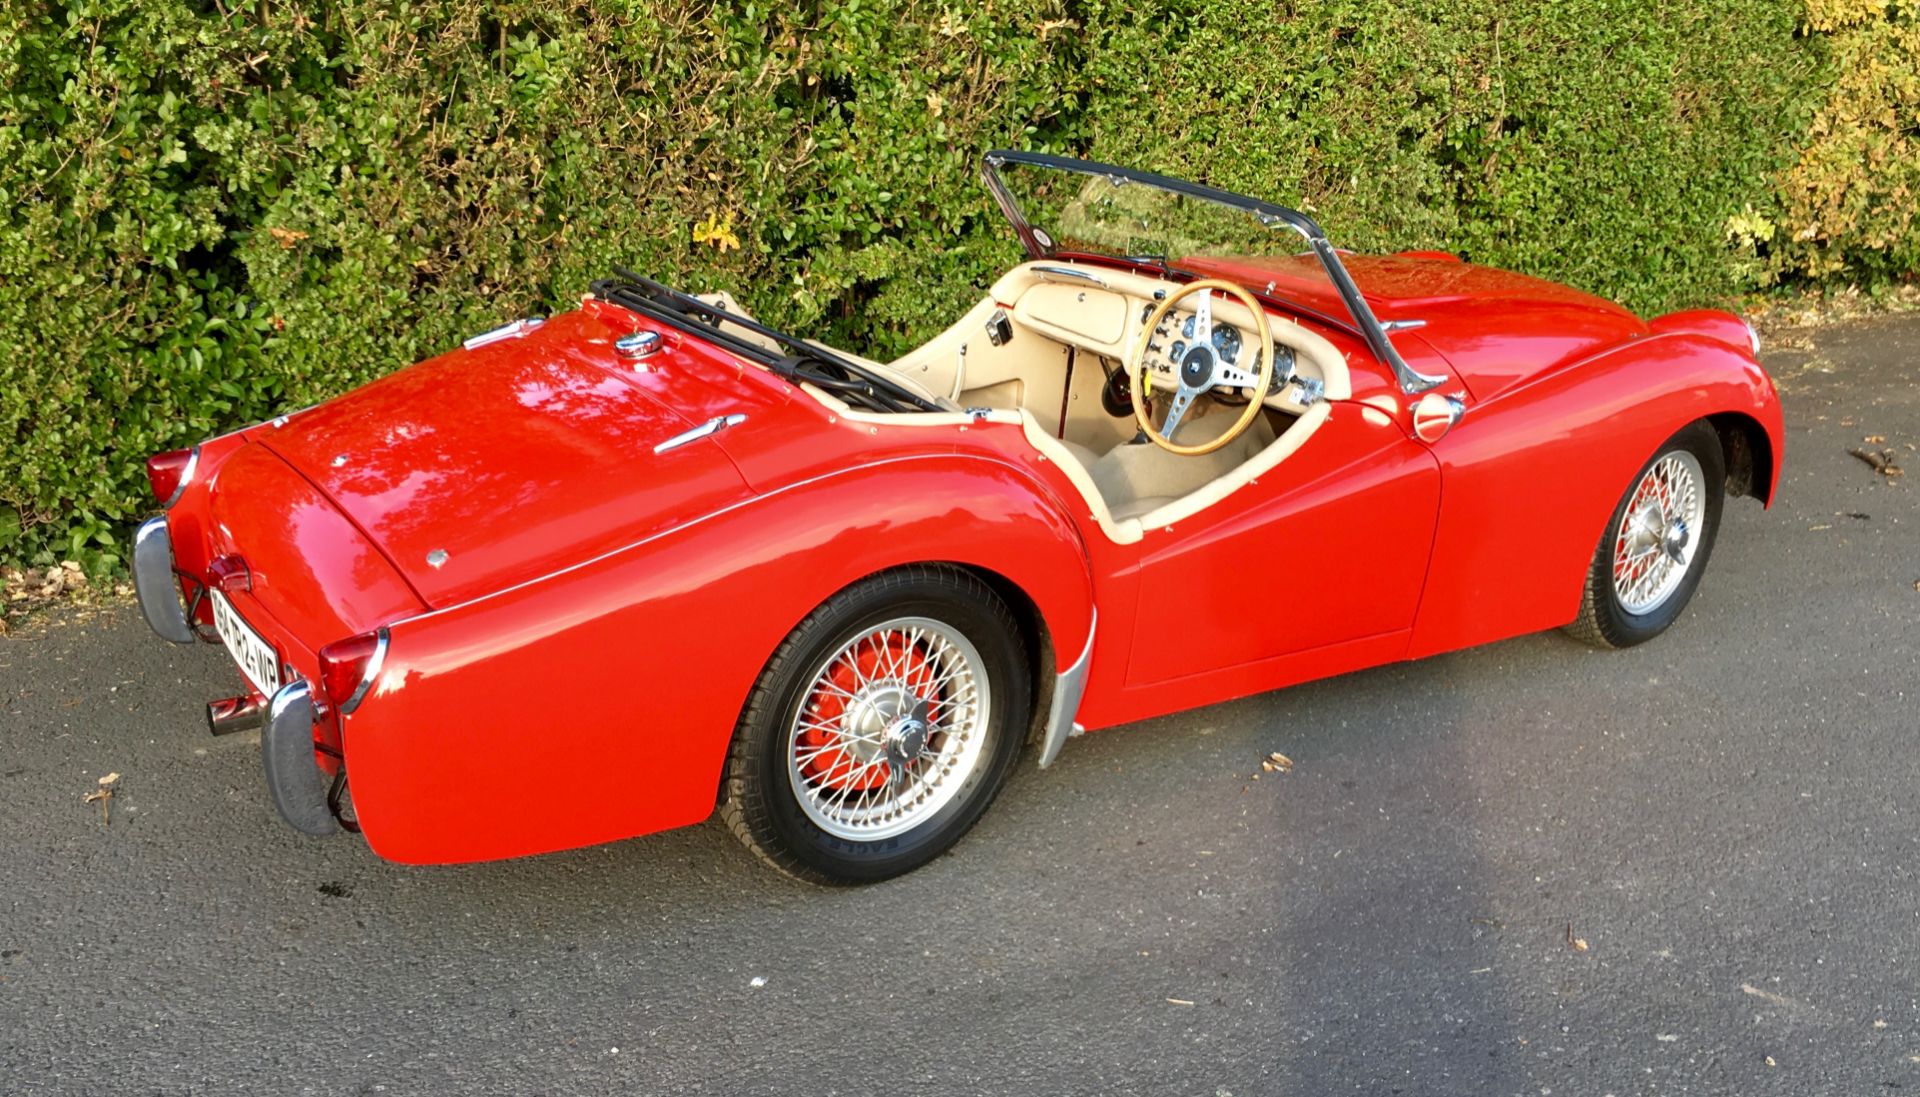 1954 Triumph TR2 Complete With Hard Top - Image 3 of 10